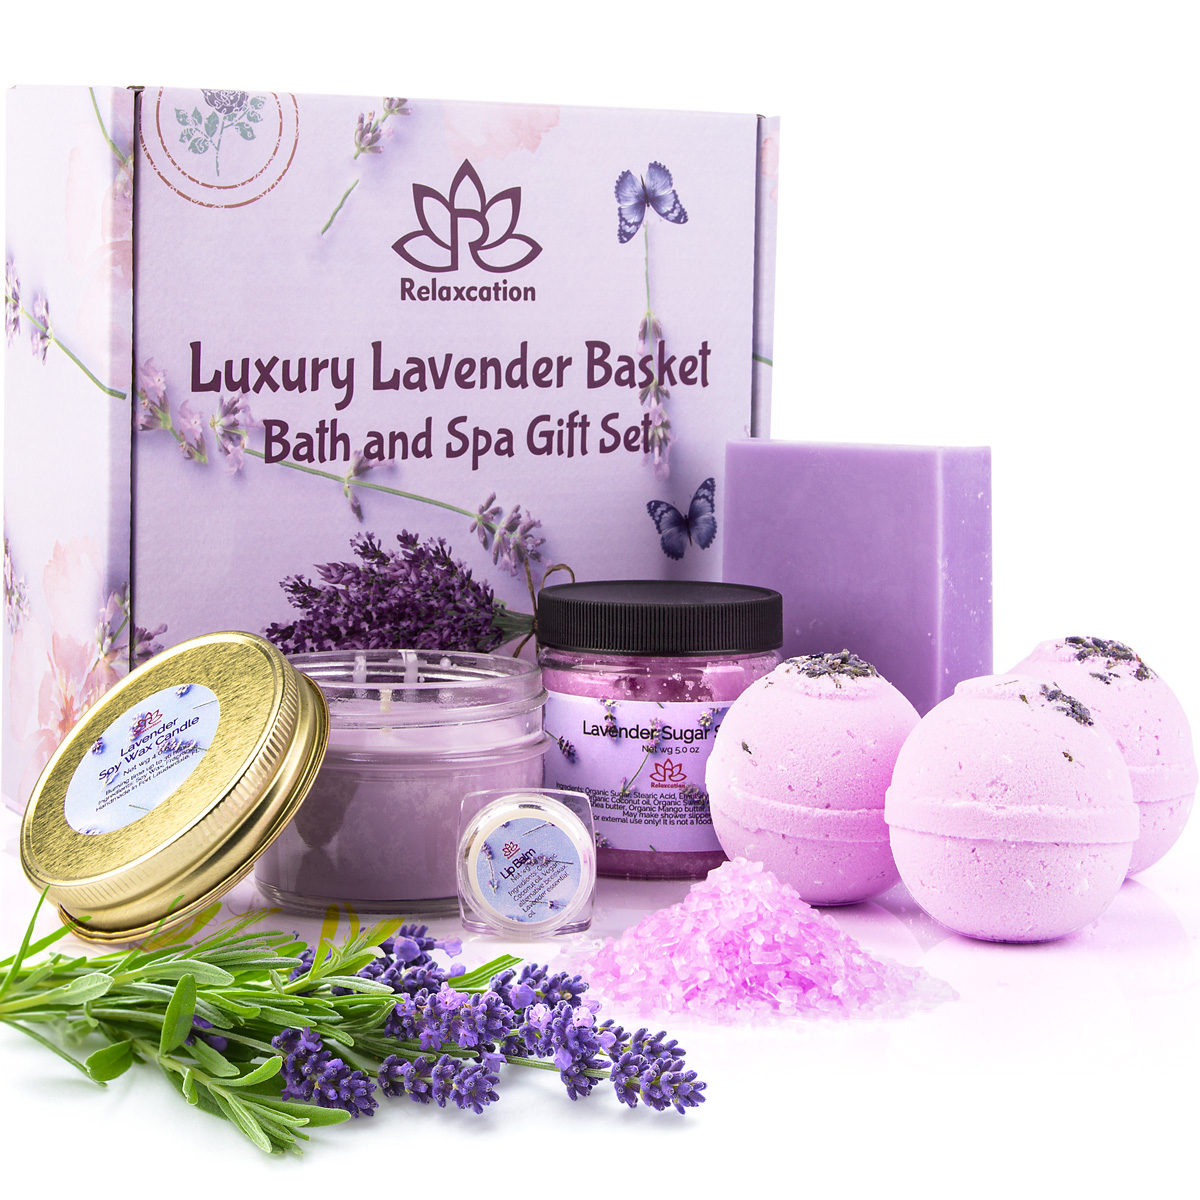 Lavender Spa Gift Set for Women Organic Home Spa Bath Basket Handmade in USA Natural and Safe by Relaxcation - image 1 of 8